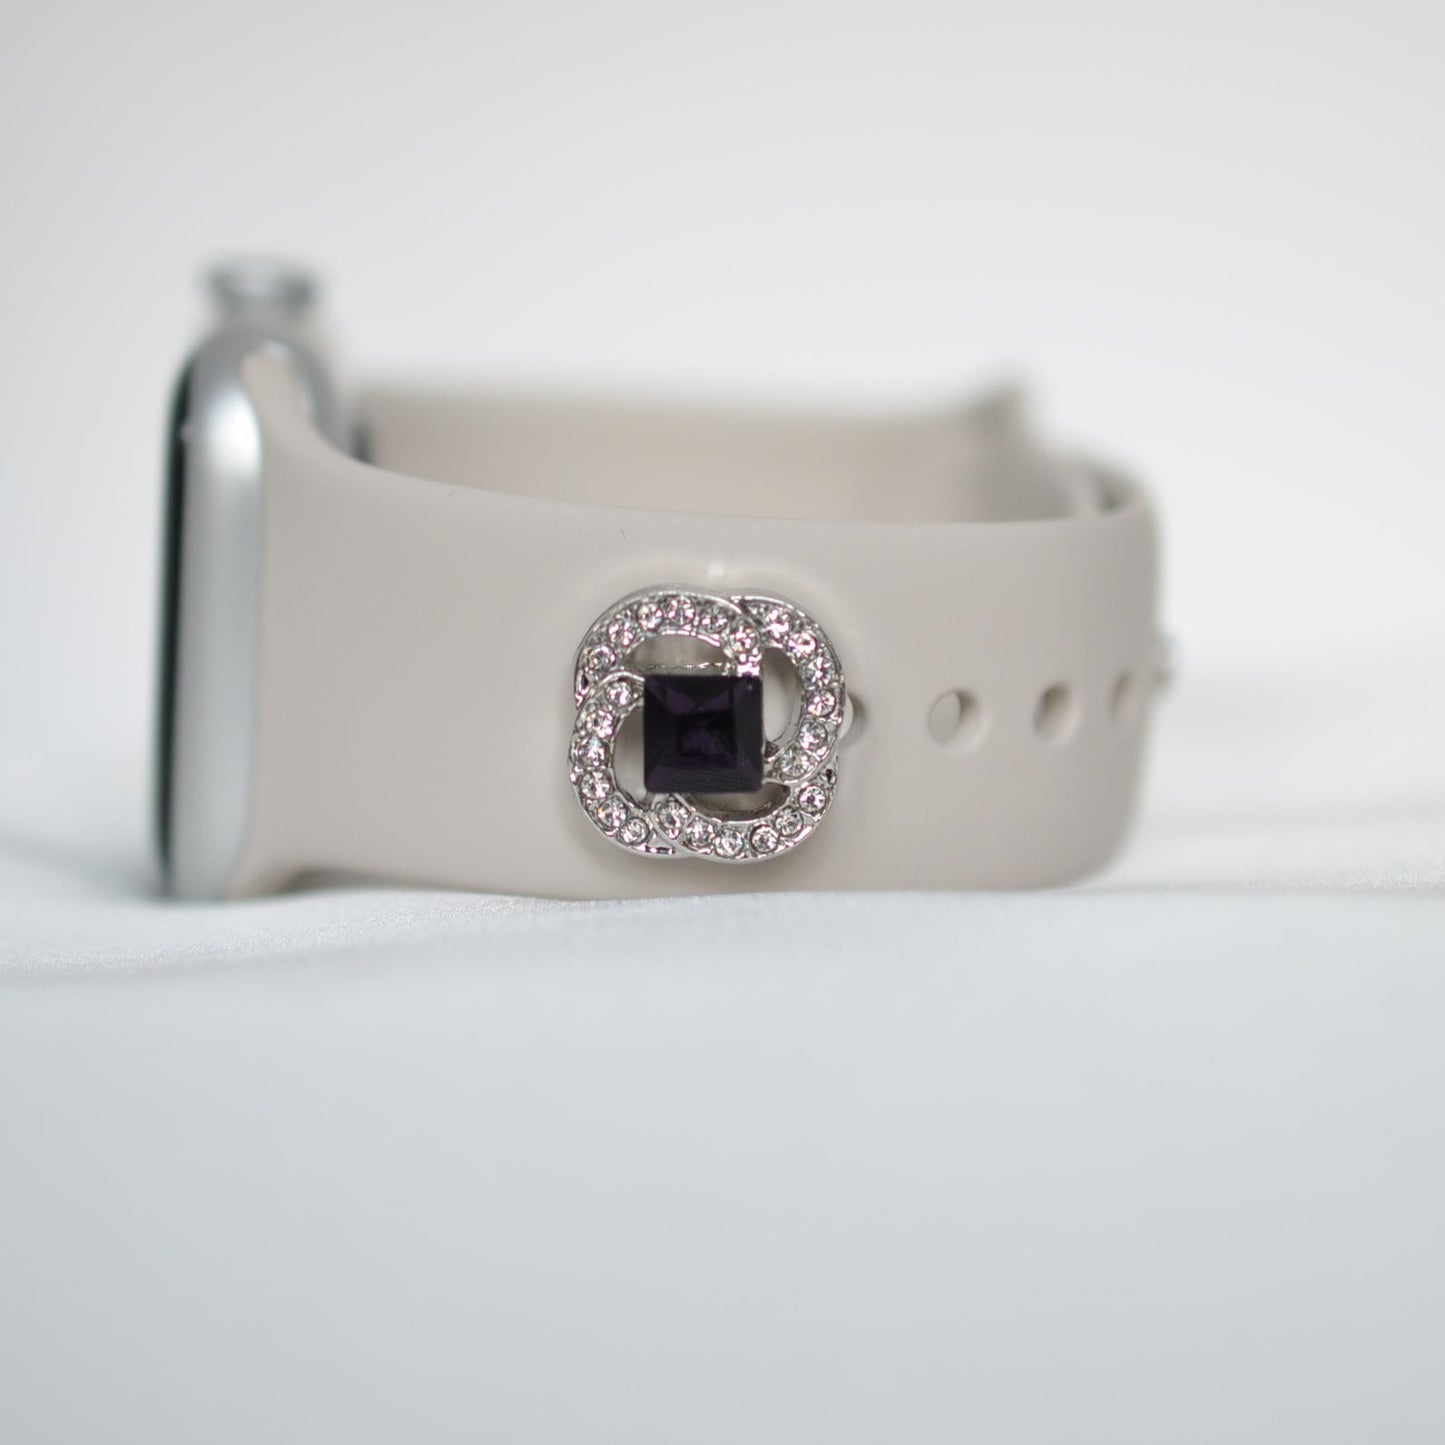 Purple Square and Clear Stone Charm for Belts, Bags and Watch Bands